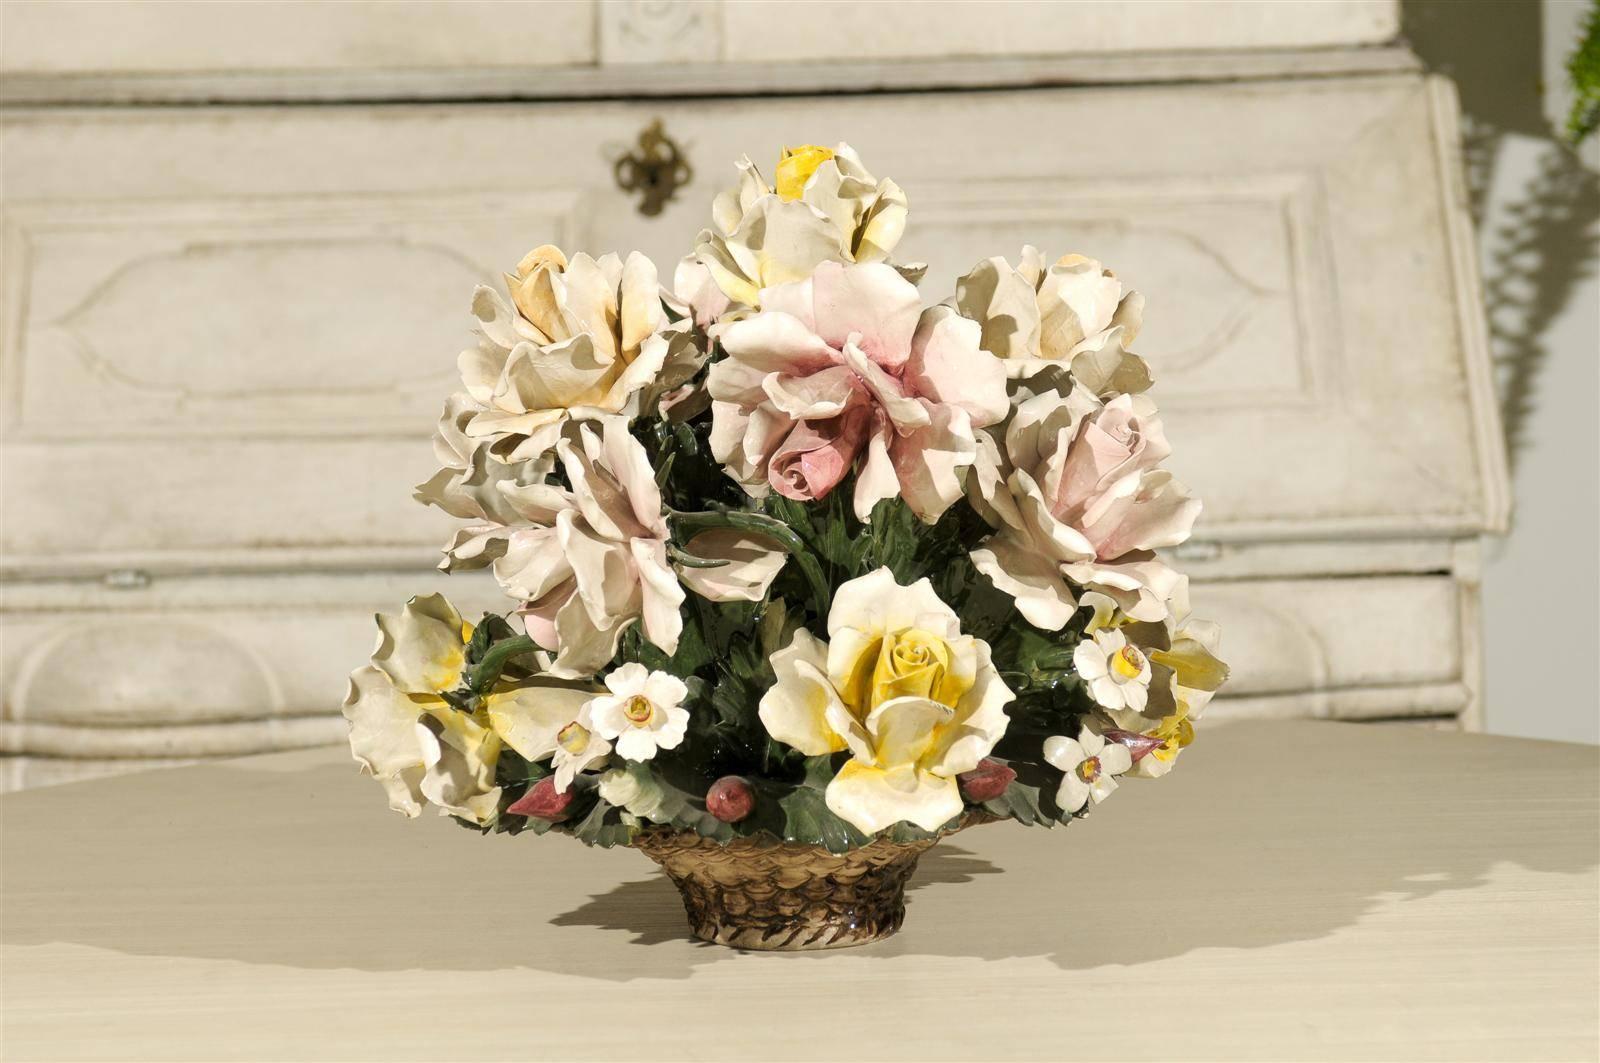 A French hand-crafted and painted majolica barbotine bouquet of flowers from the second half of the 19th century. This French barbotine decorative bouquet was born in the later years of the Reign of Emperor Napoleon III, at a time when France lost